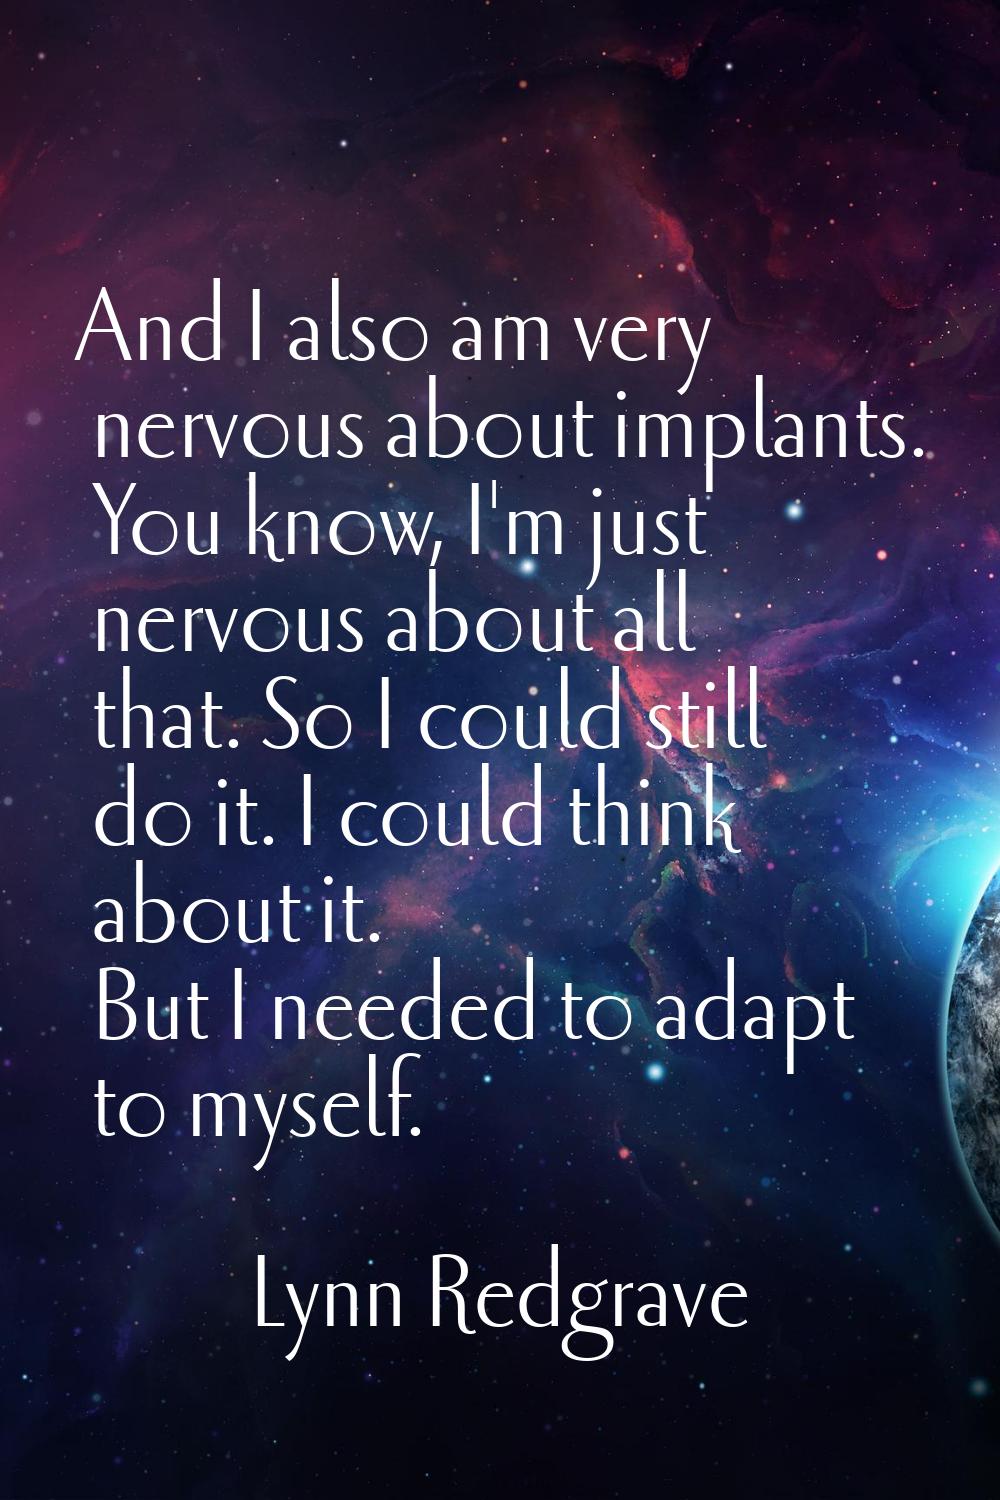 And I also am very nervous about implants. You know, I'm just nervous about all that. So I could st